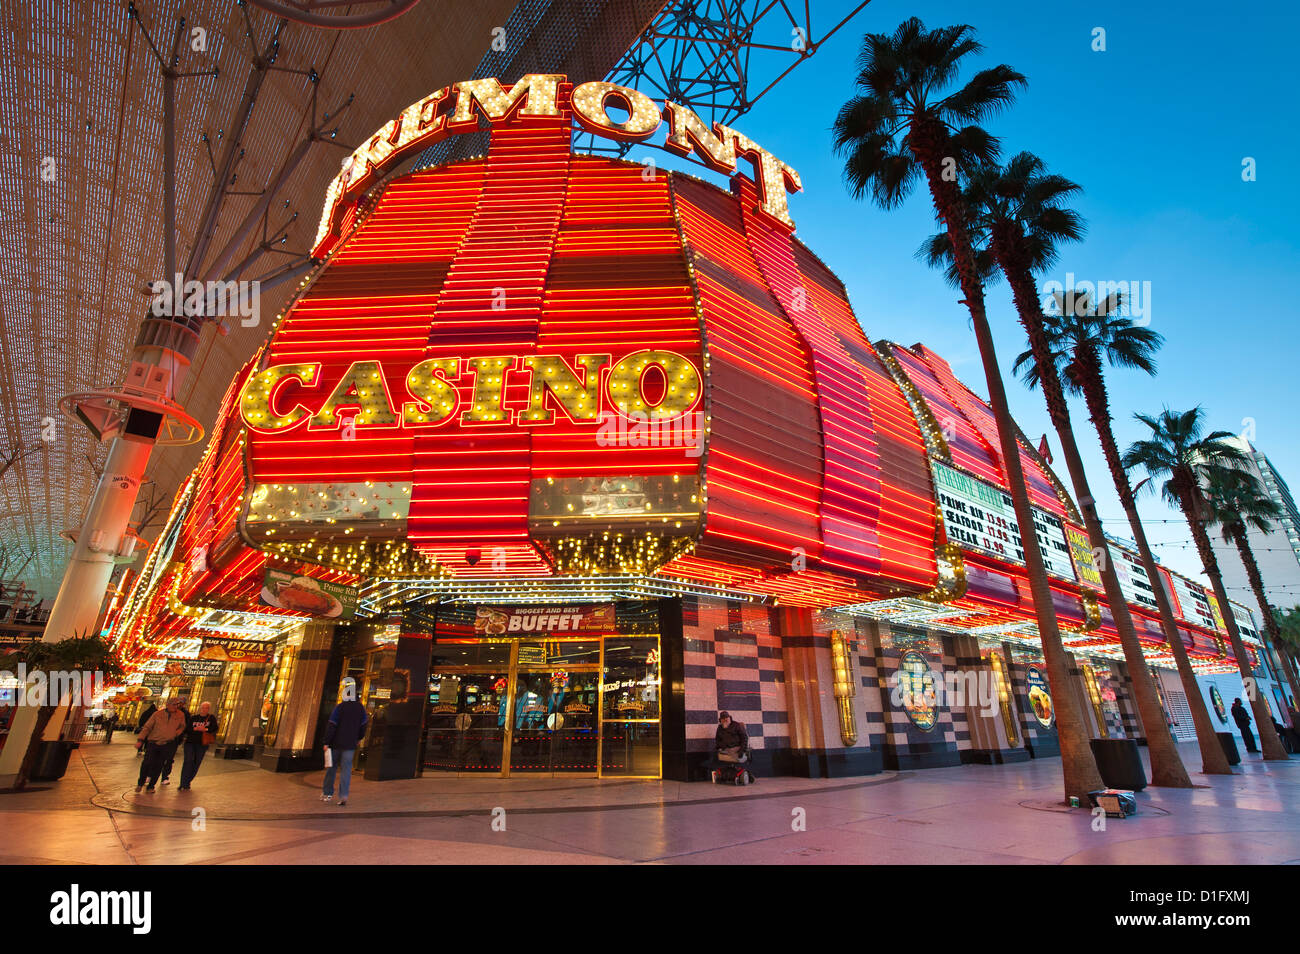 Fremont Casino and the Fremont Street Experience, Las Vegas, Nevada